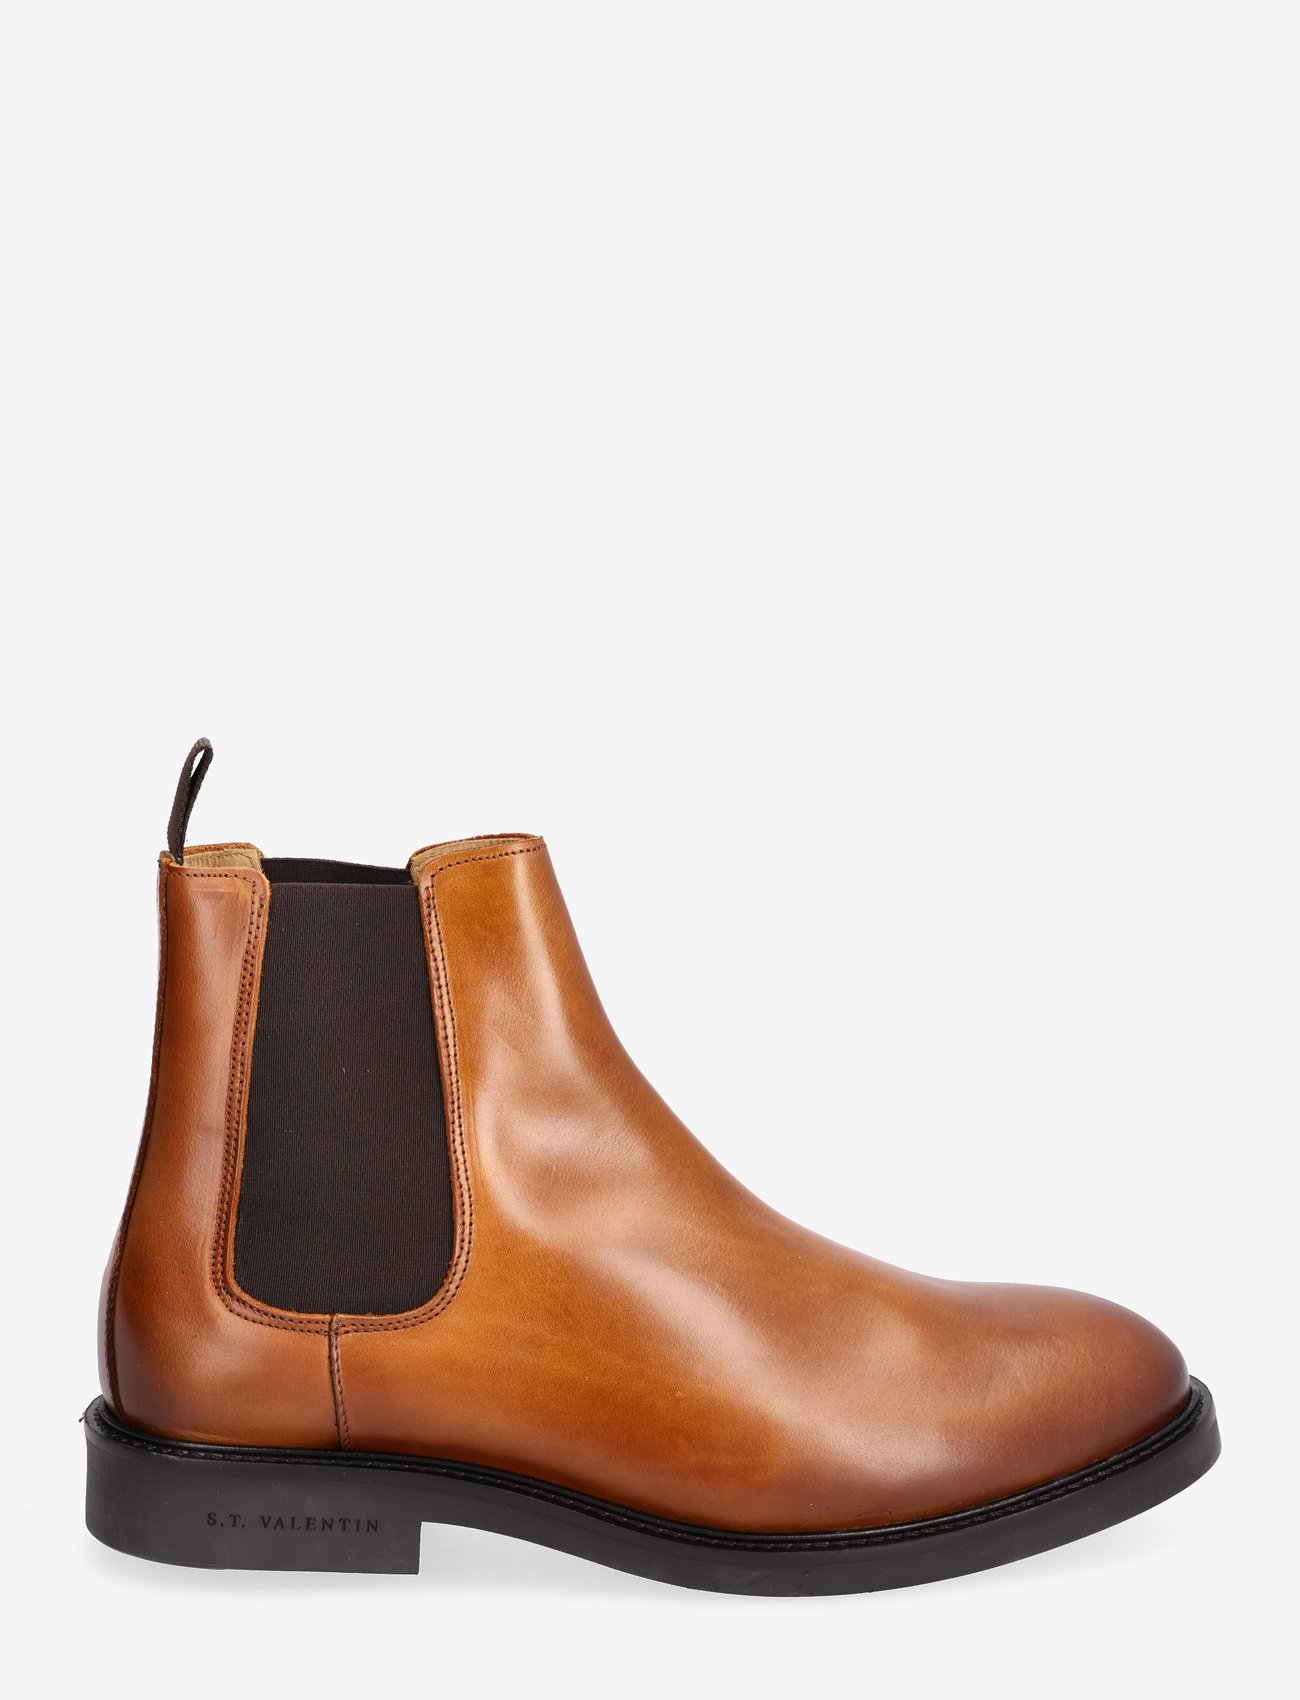 S.T. VALENTIN - Classic Chelsea boot - Pull up leather - chelsea boots - cognac - 1